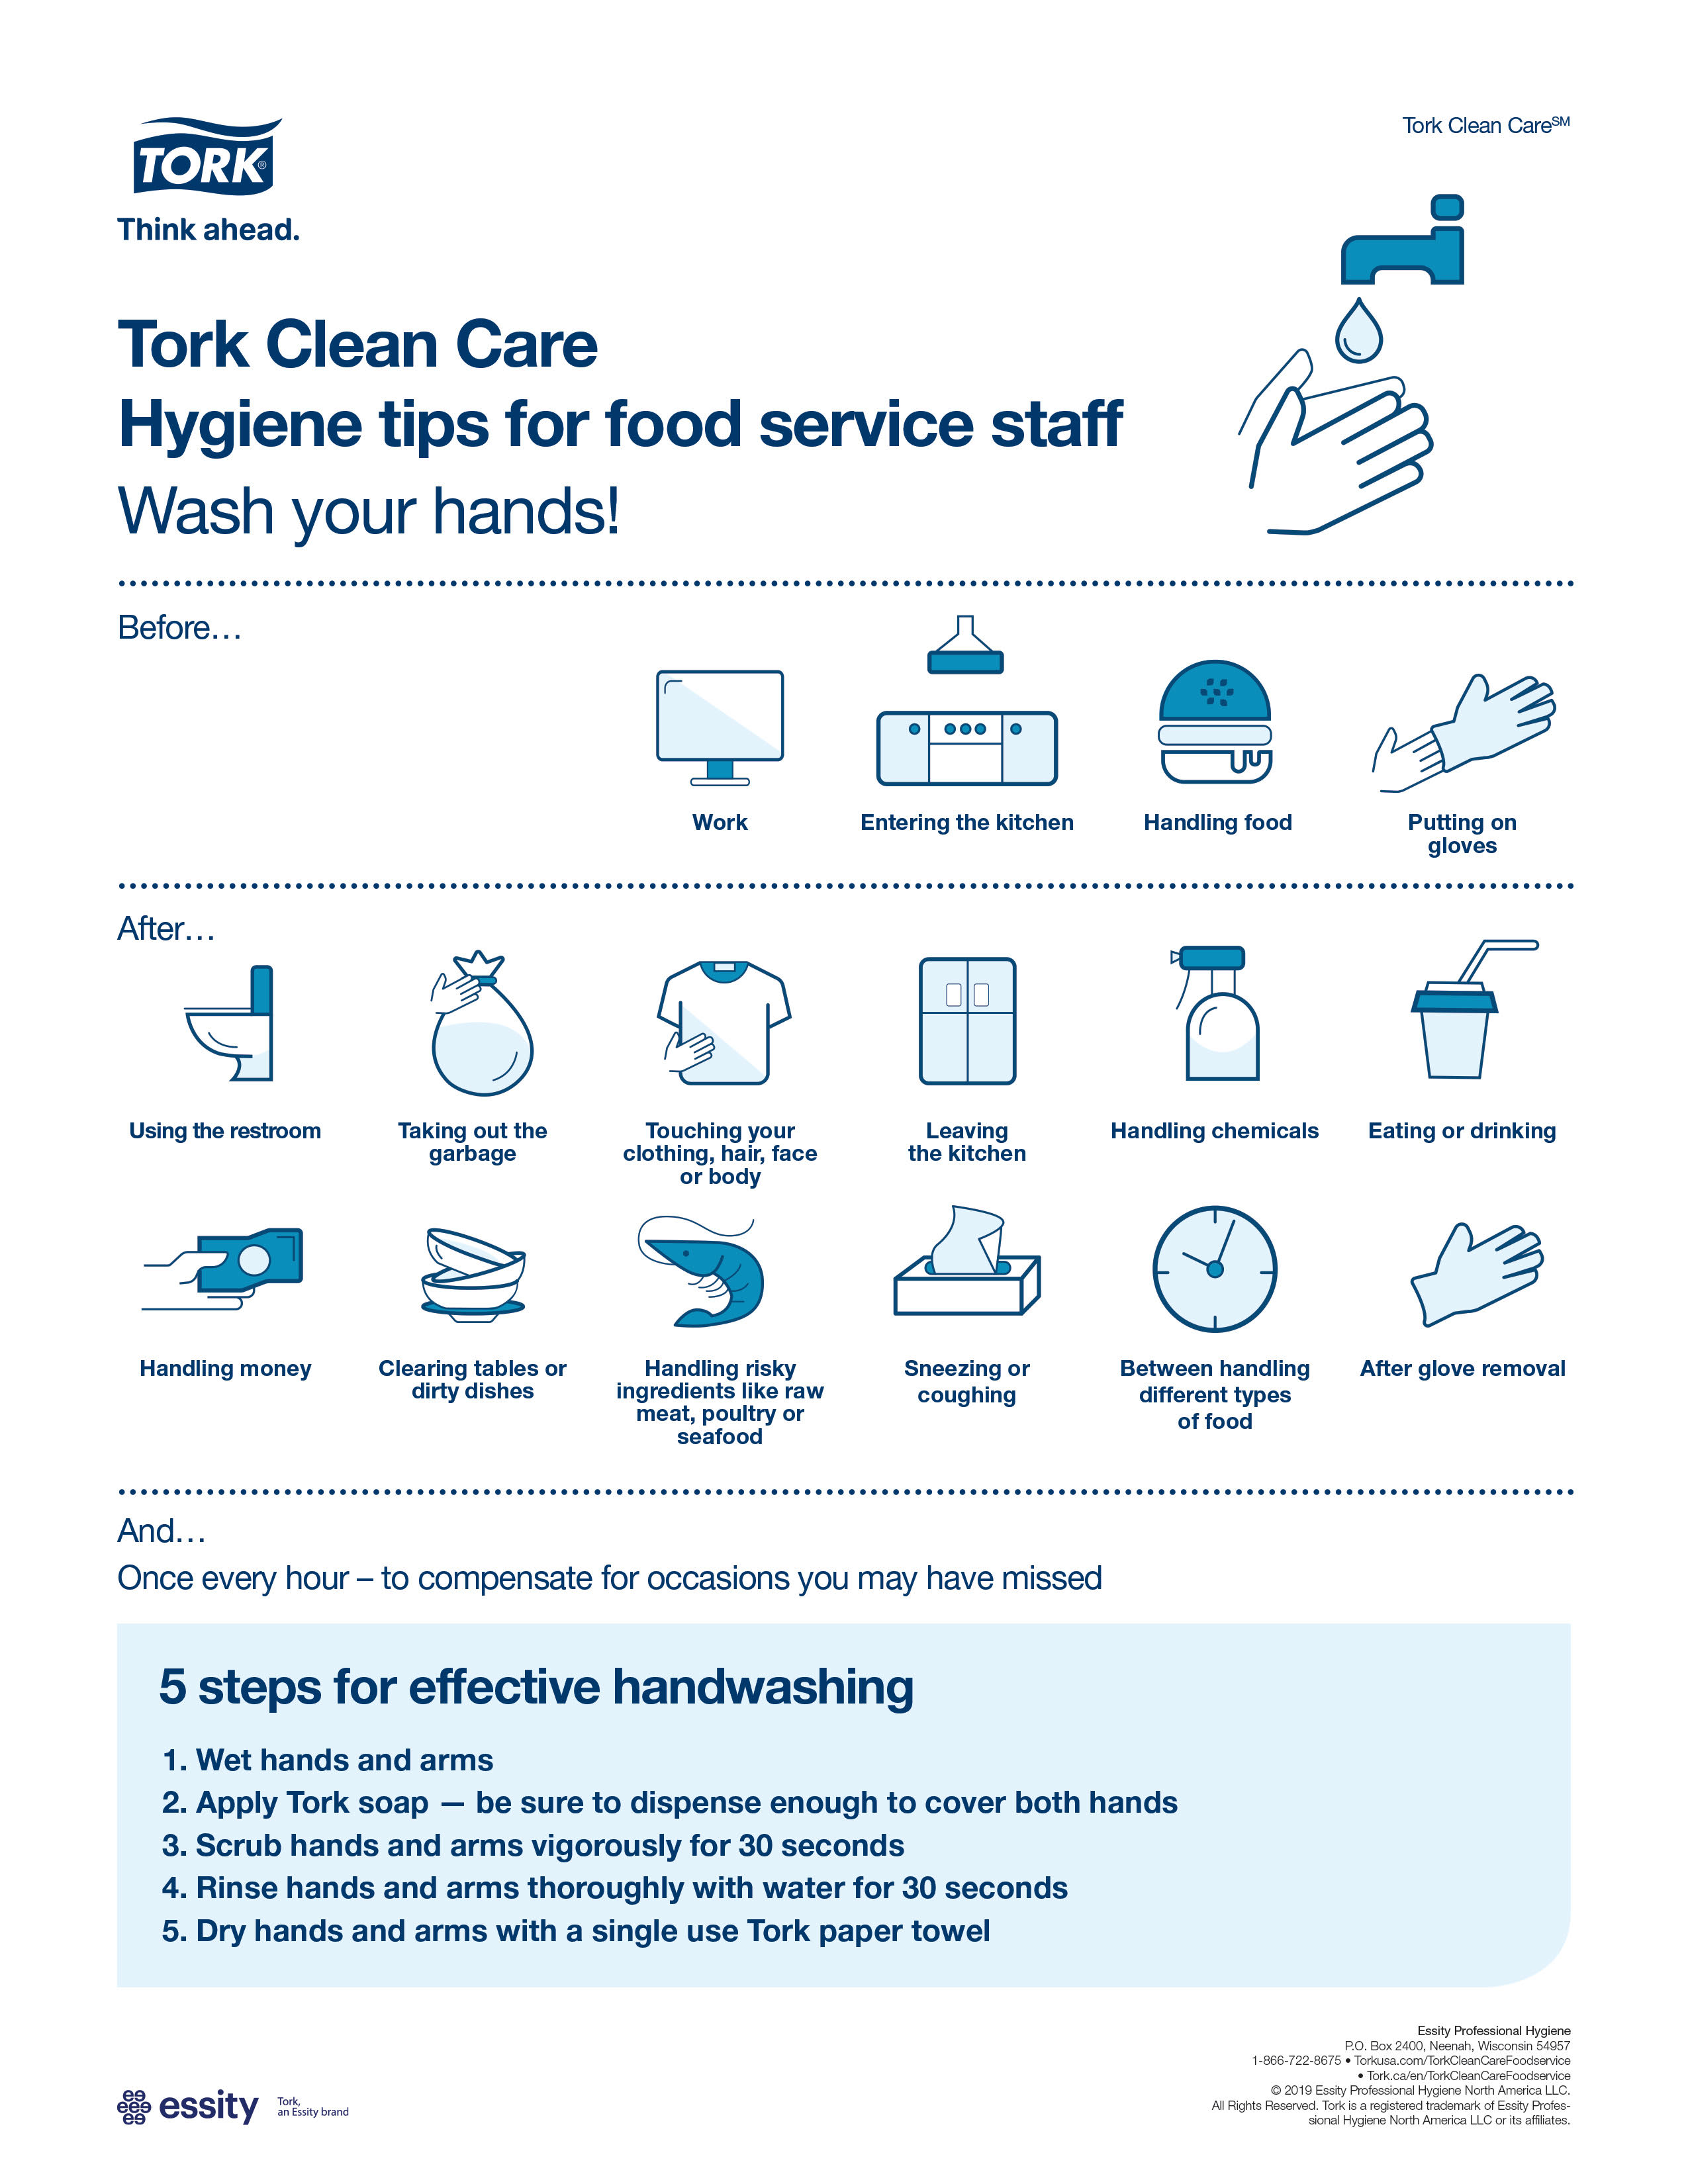 Hygiene tips for food service staff